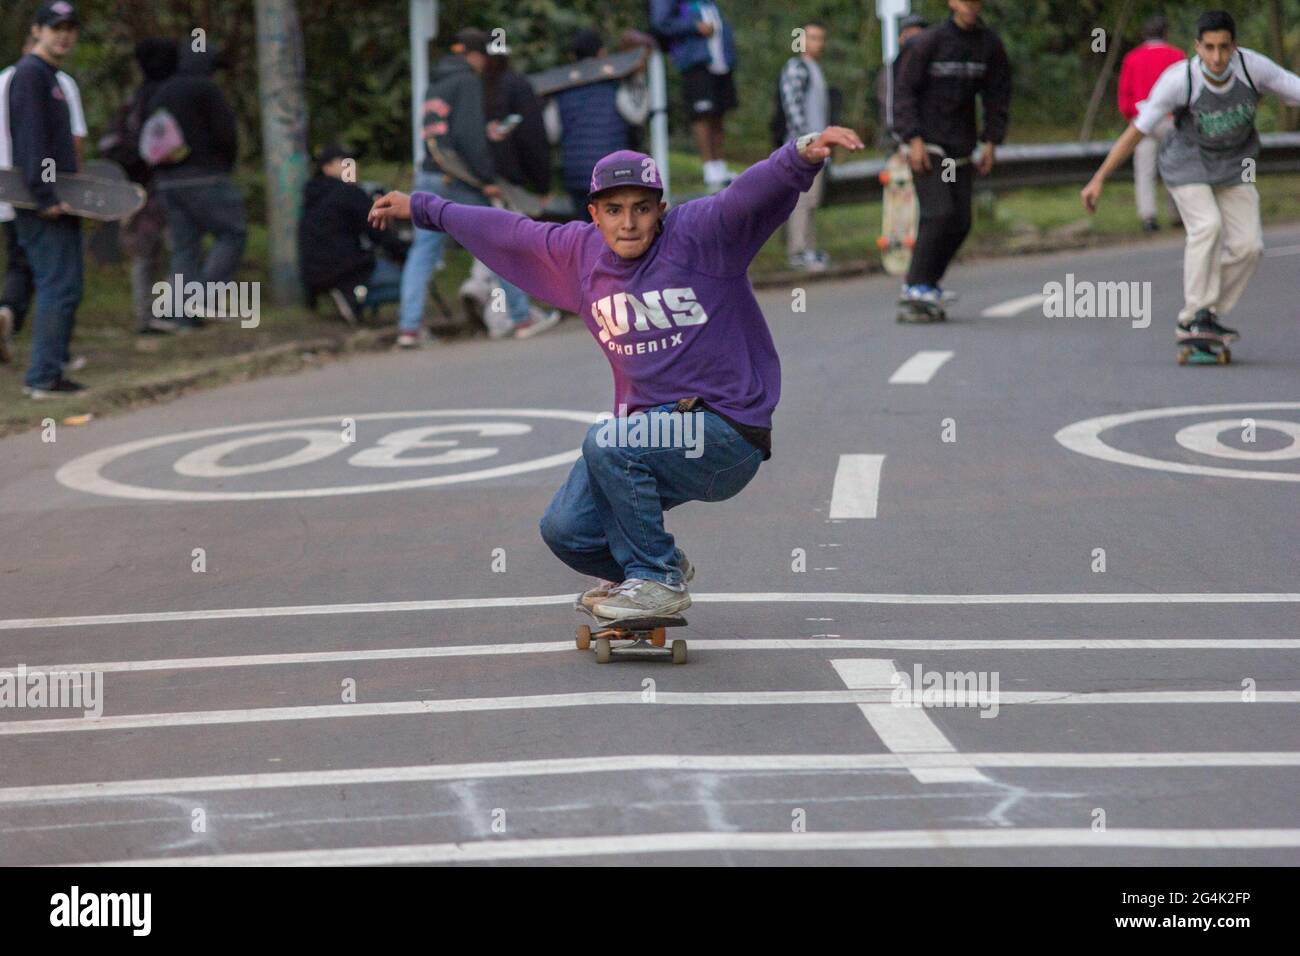 Skaters downhill the "Parque Nacional" main road during the international  World Skateboarding Day in Bogota, Colombia on June 21, 2021 Stock Photo -  Alamy